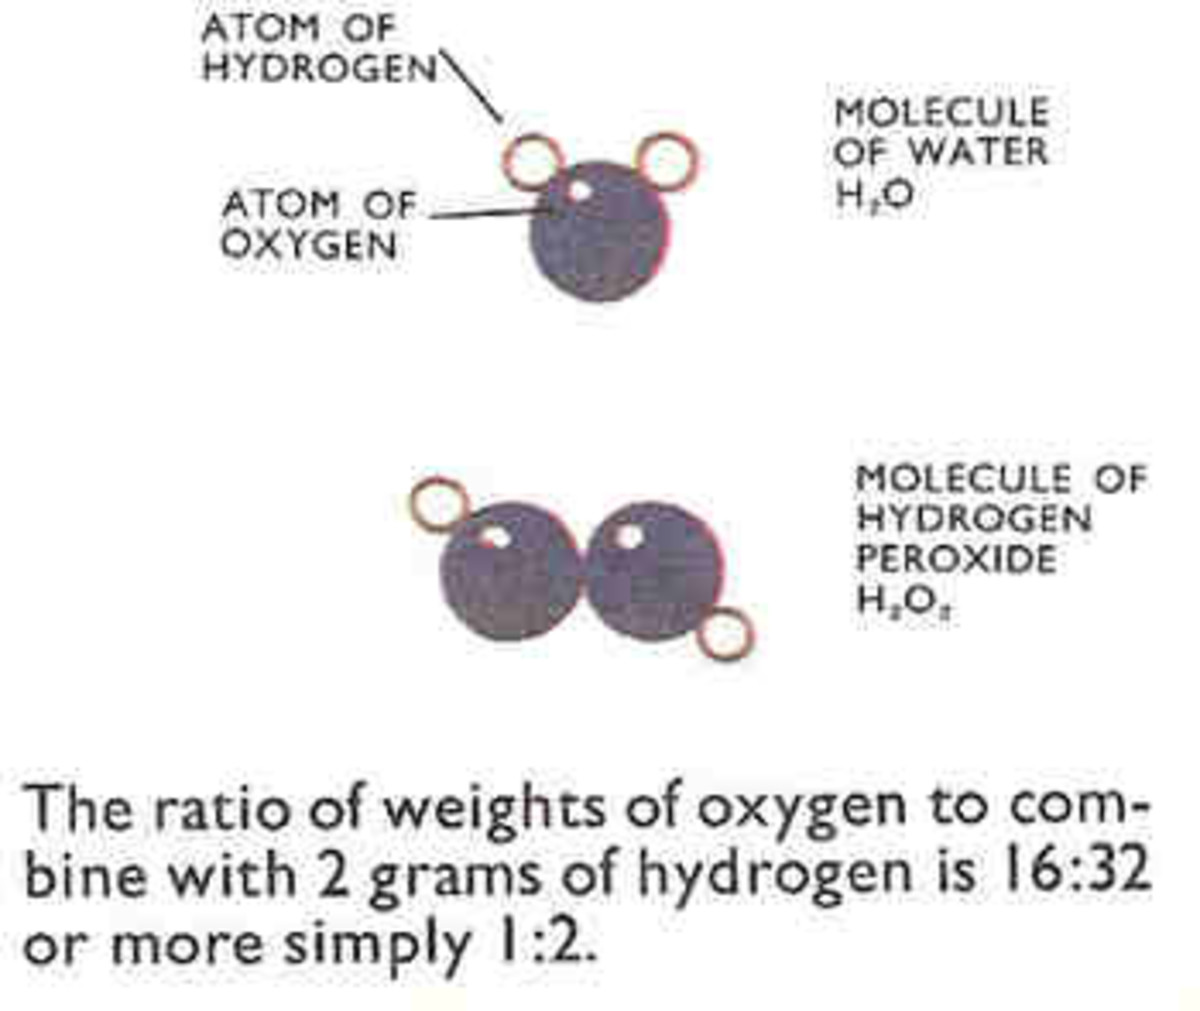 When atoms combine they do so in small numbers ratios.